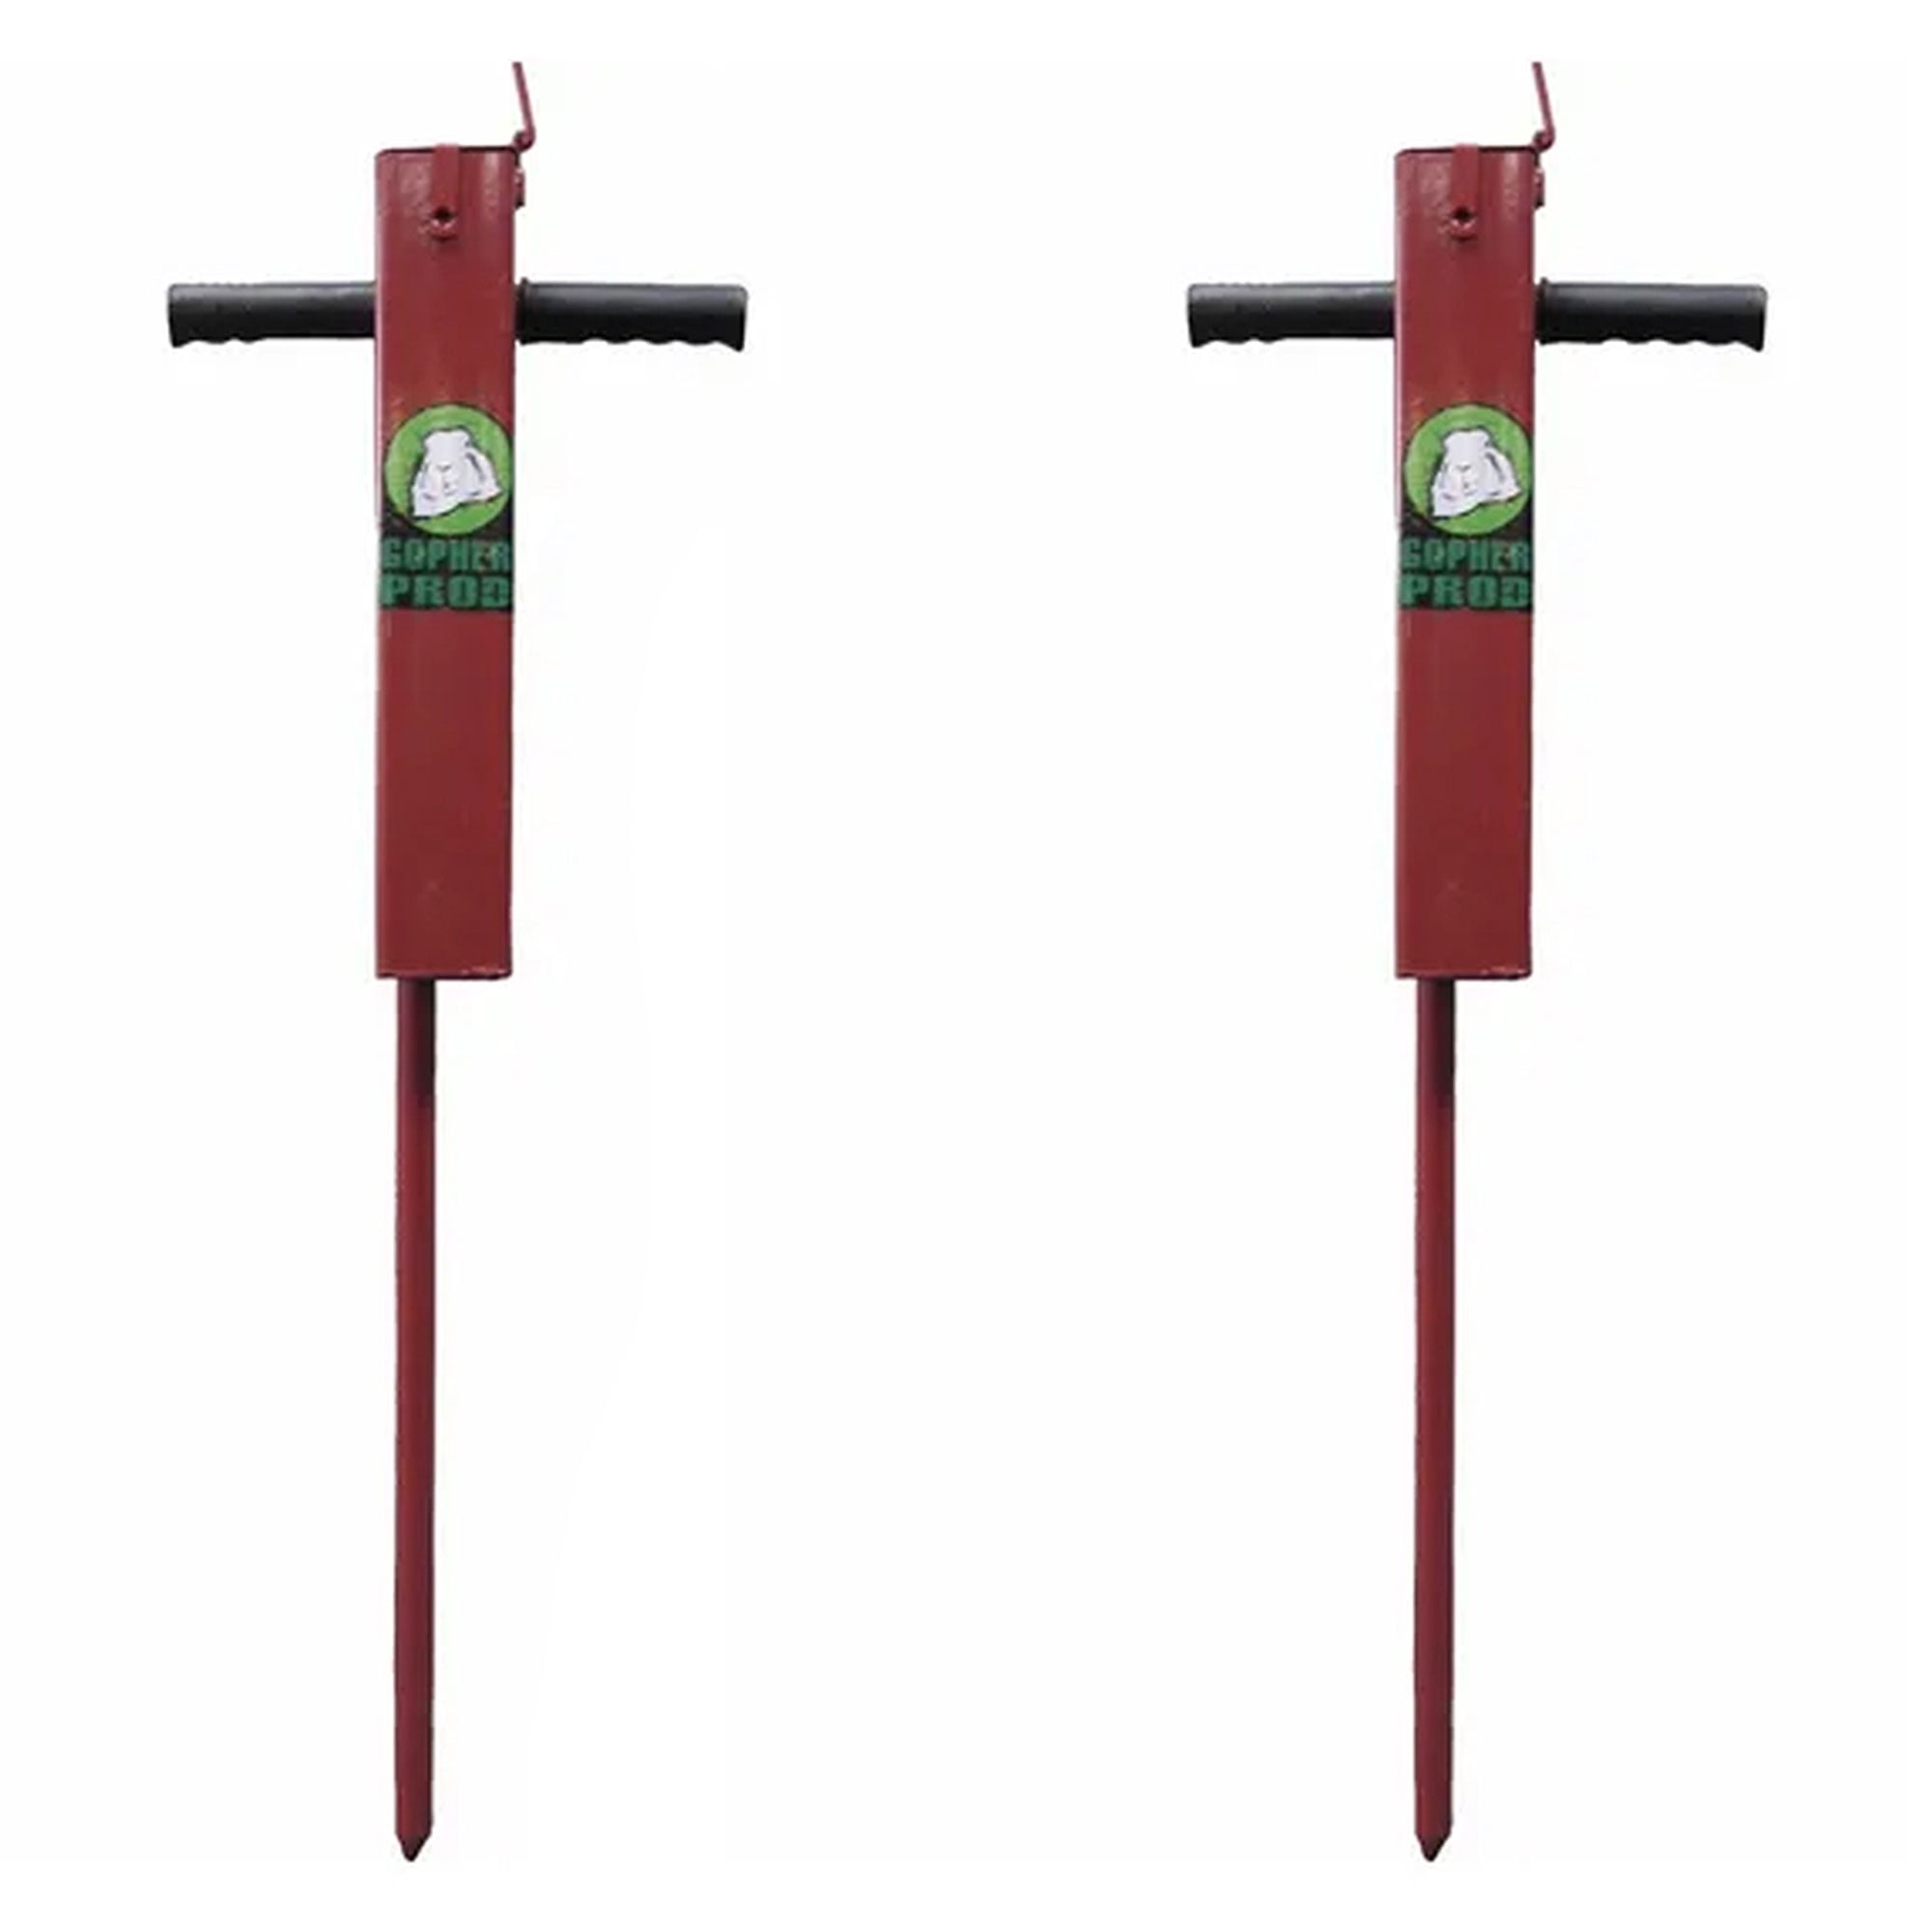 Rugged Ranch MGP1 Professional Gopher Prod Poison Bug Control Tool (2 Pack)